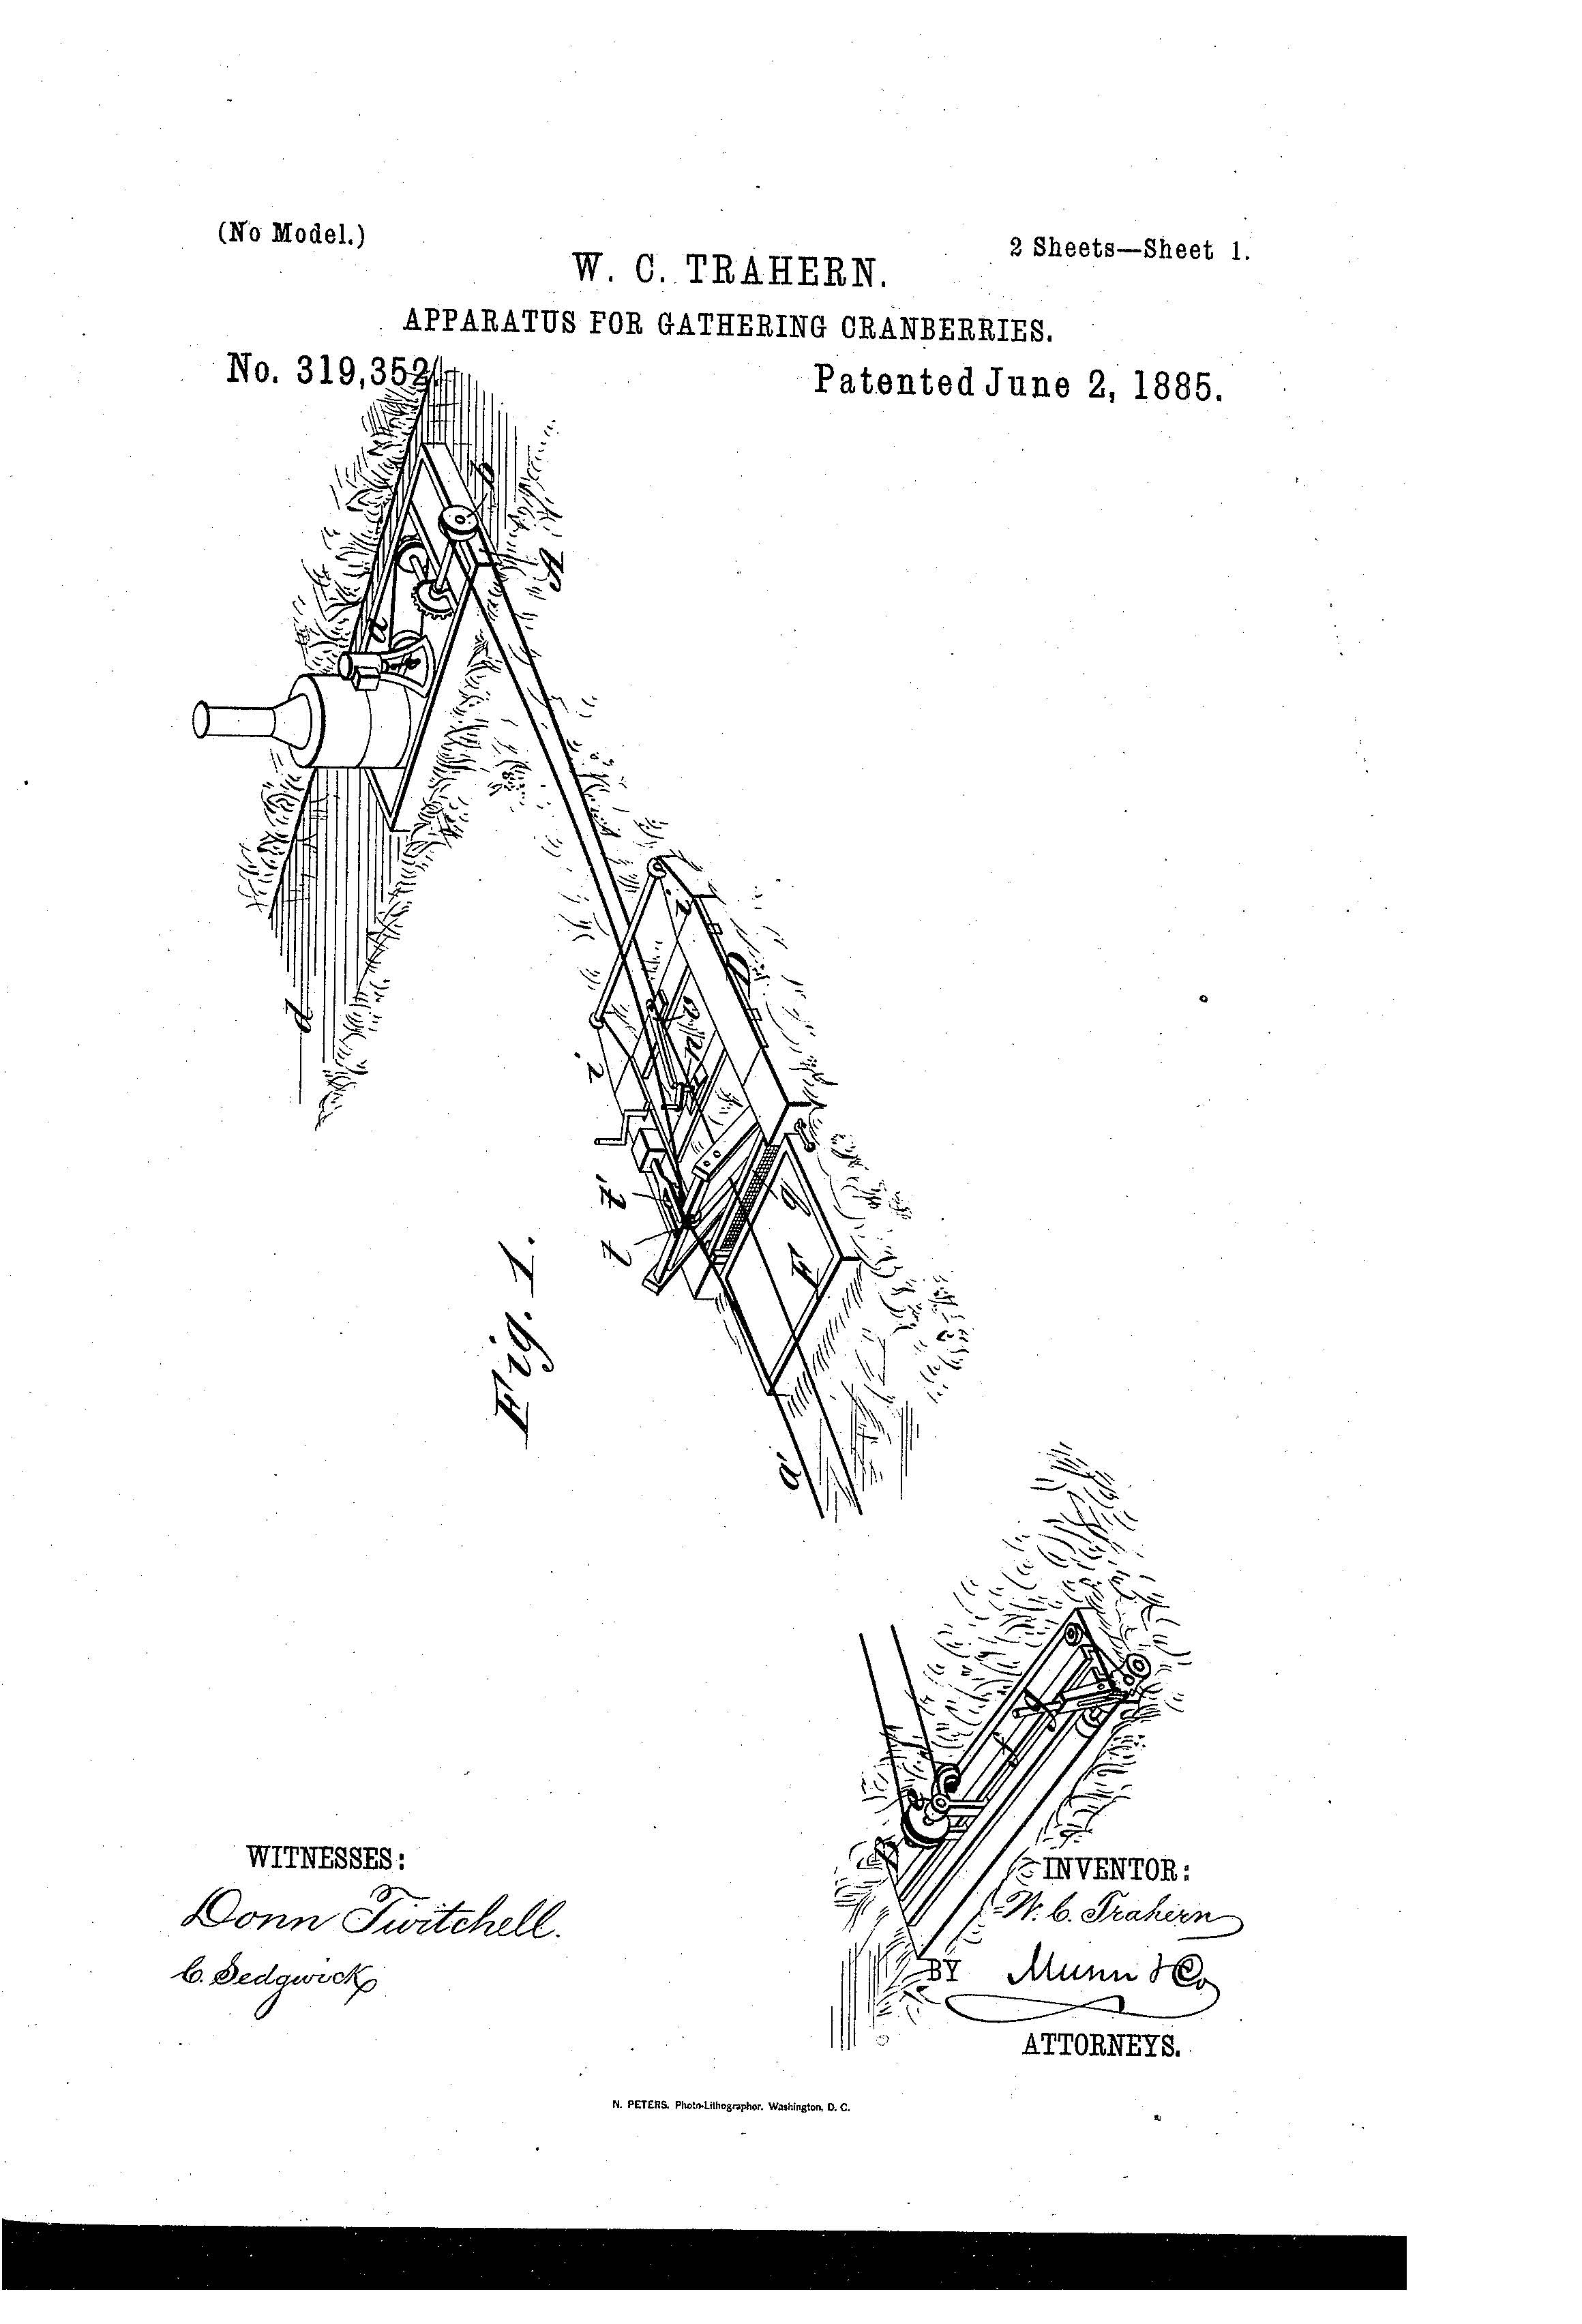 apparatus for gathering cranberries